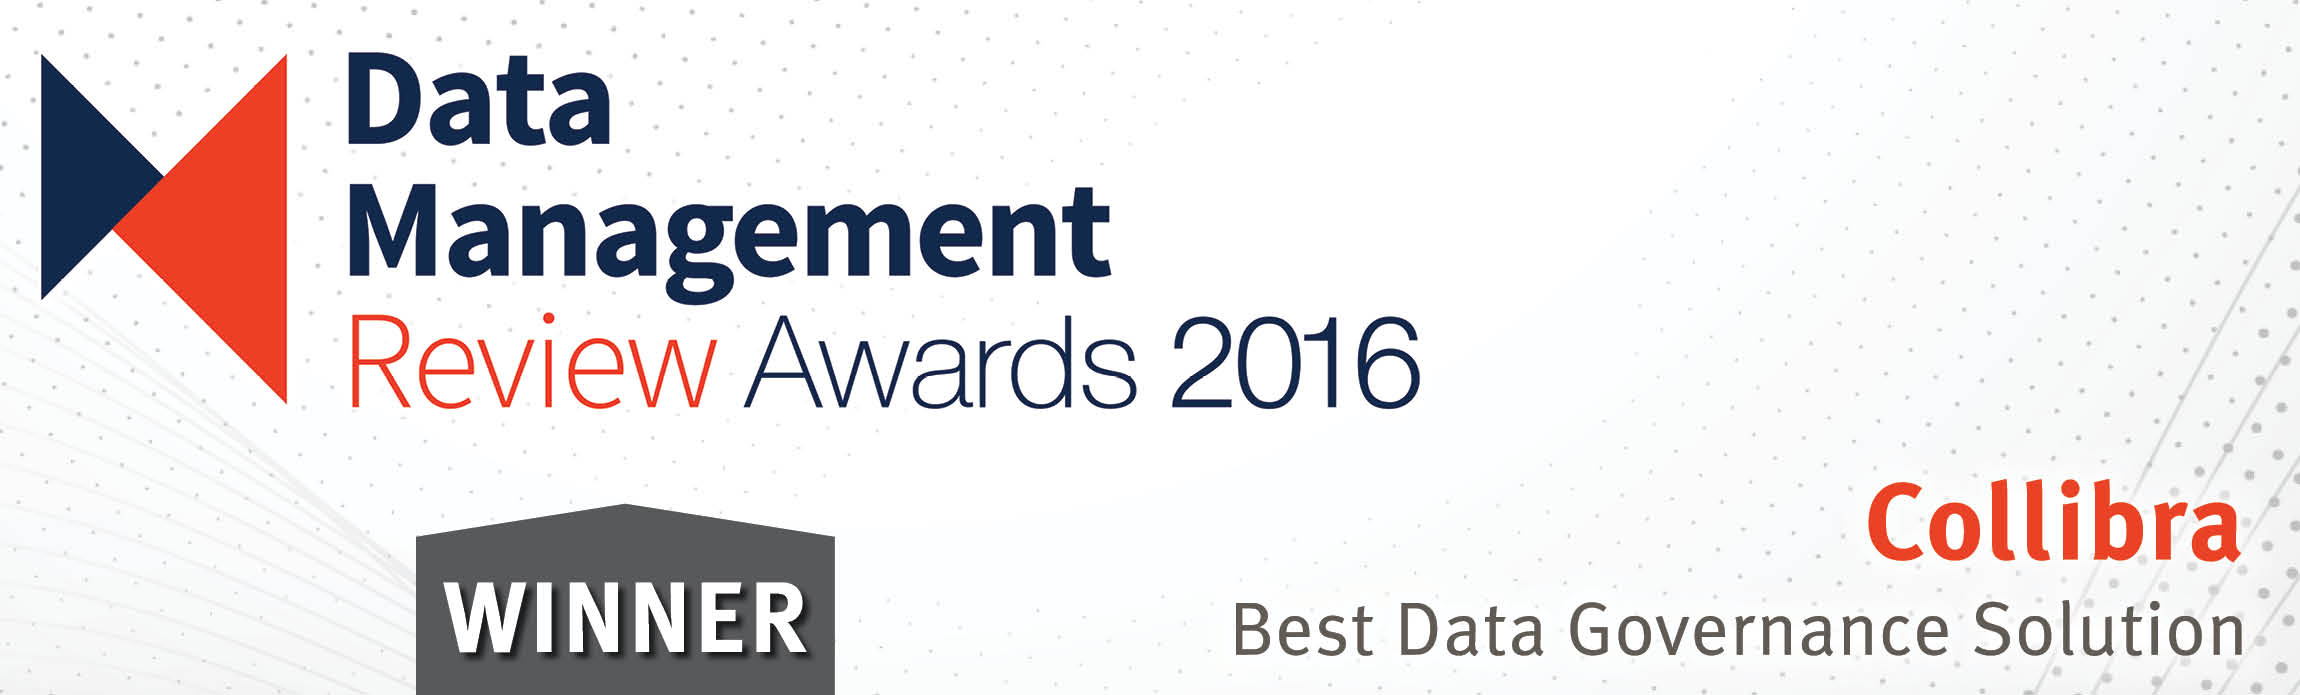 Data Management Review Awards 2016